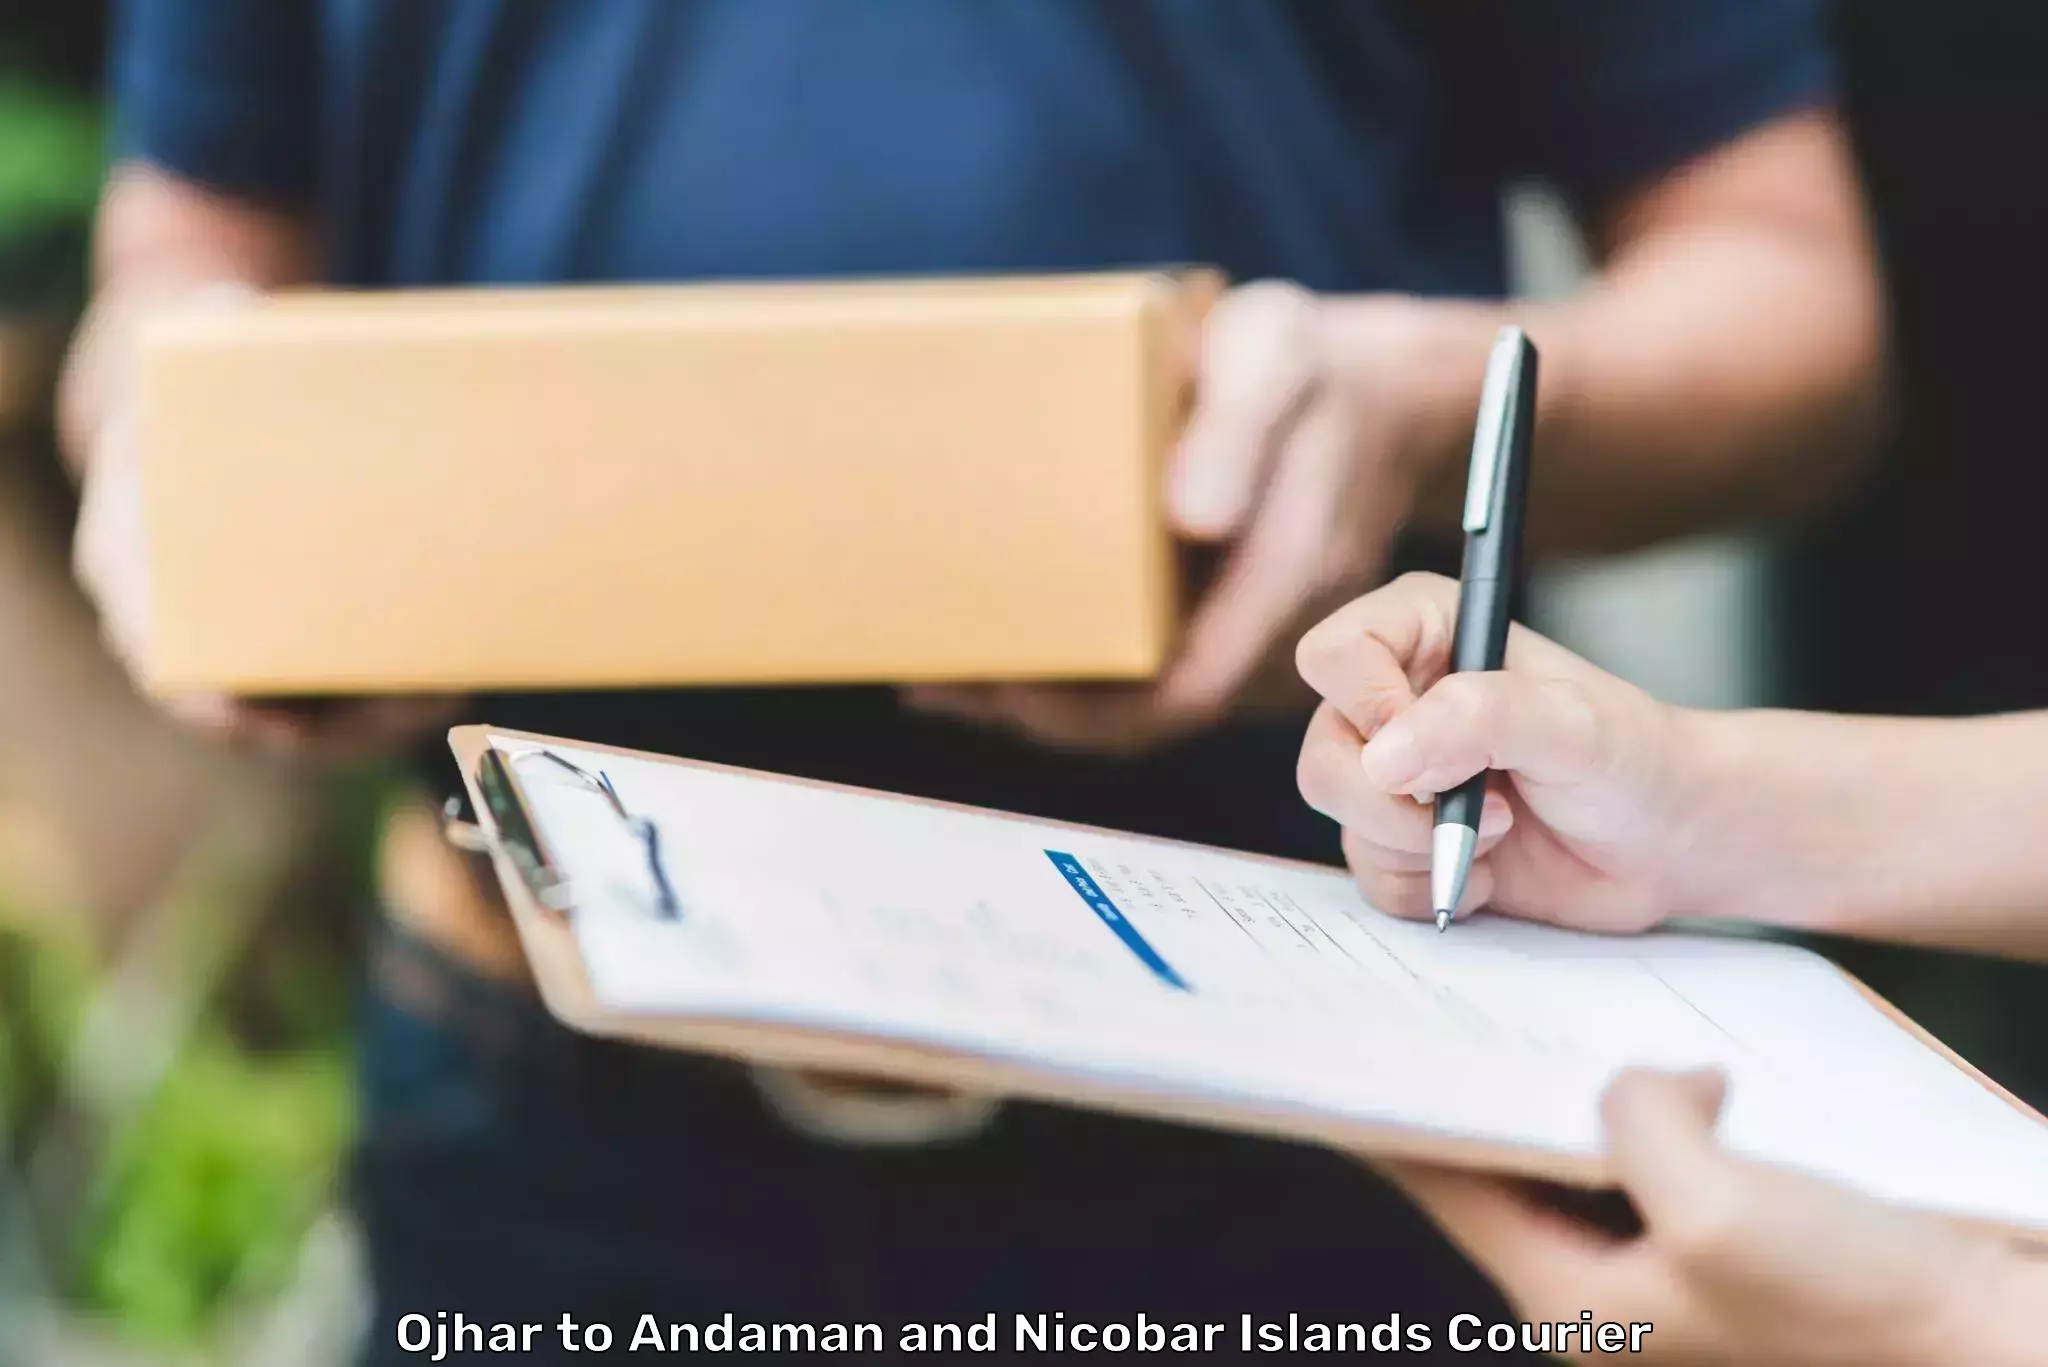 Courier service innovation Ojhar to Andaman and Nicobar Islands